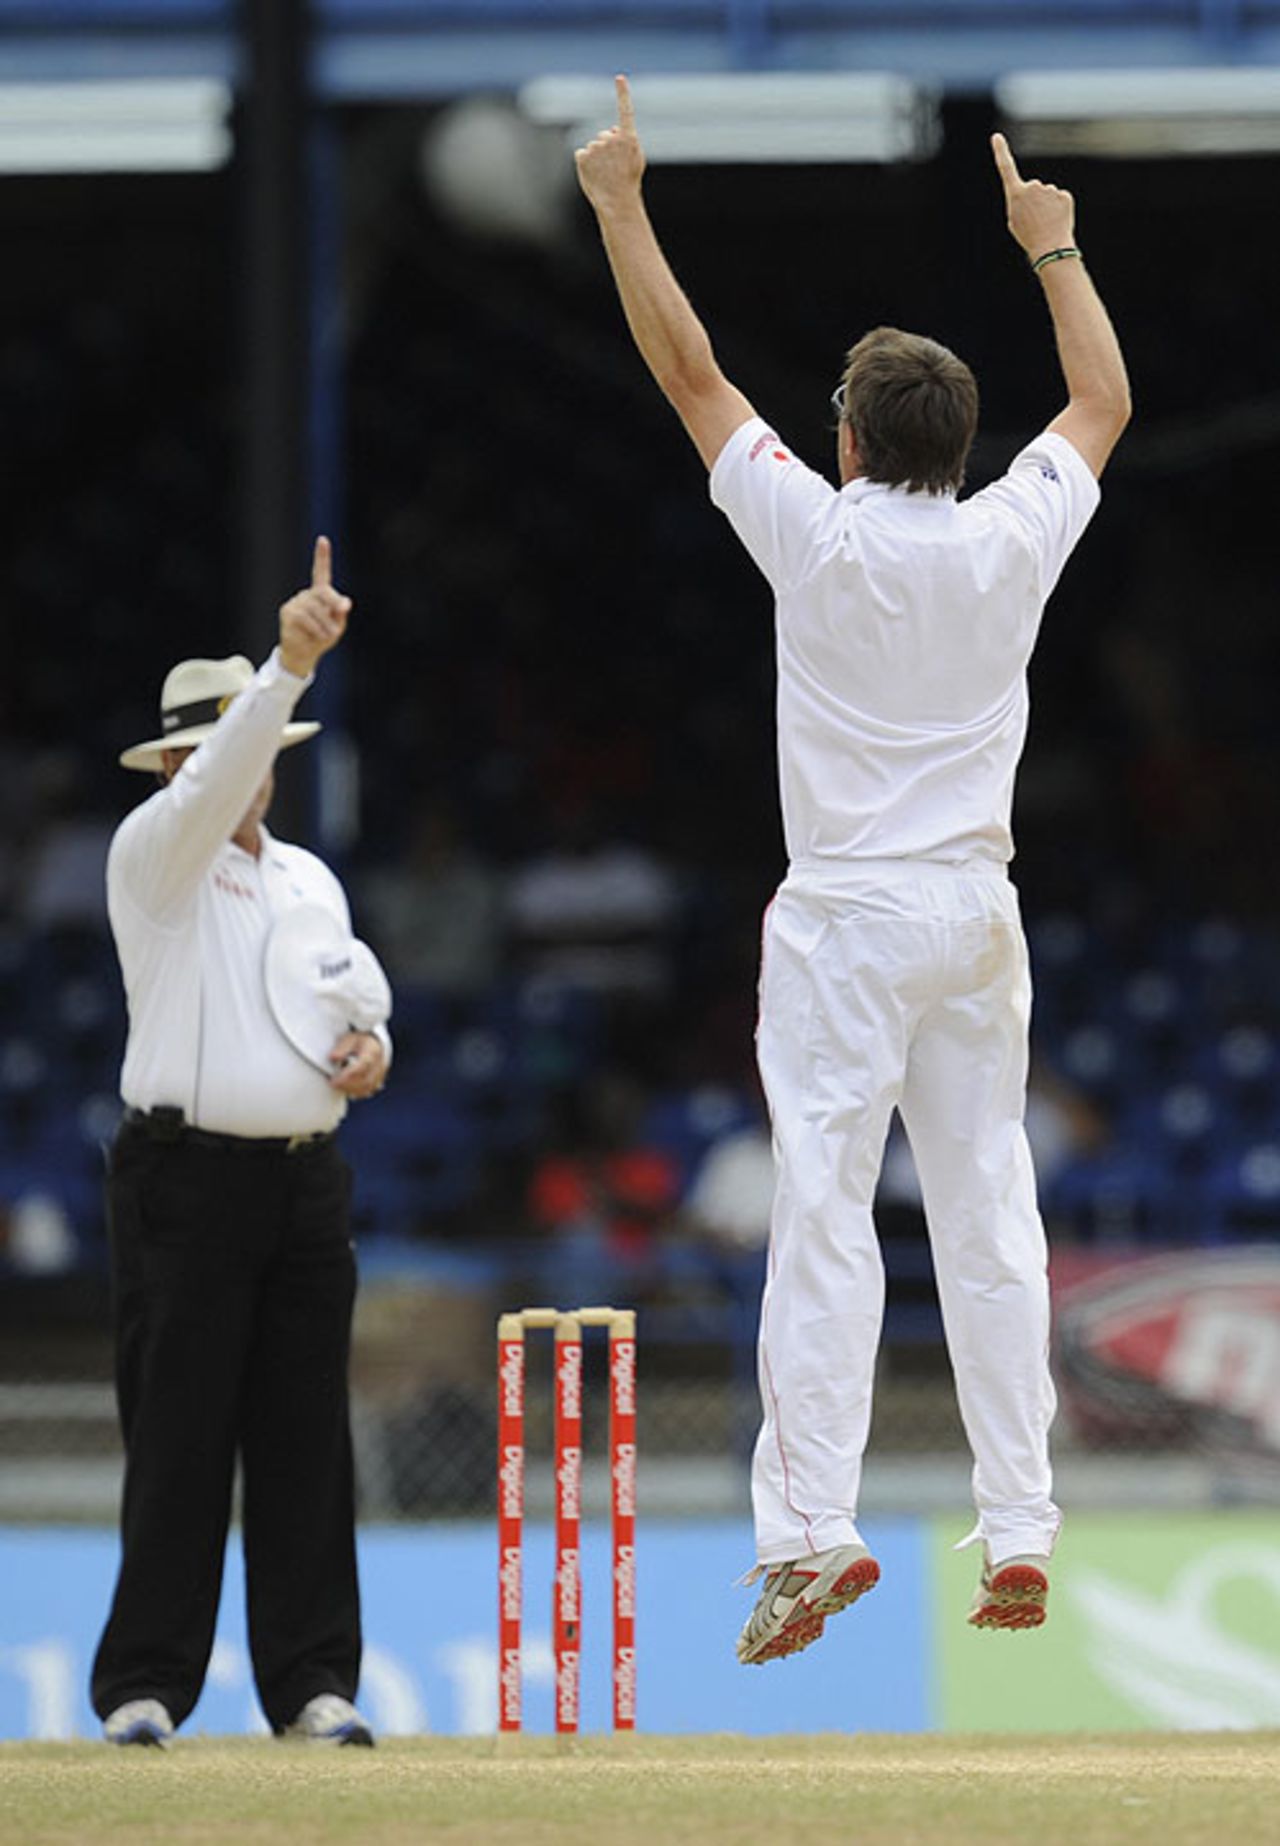 Graeme Swann appeals successfully for the wicket of Devon Smith, West Indies v England, 5th Test, Trinidad, March 10, 2009